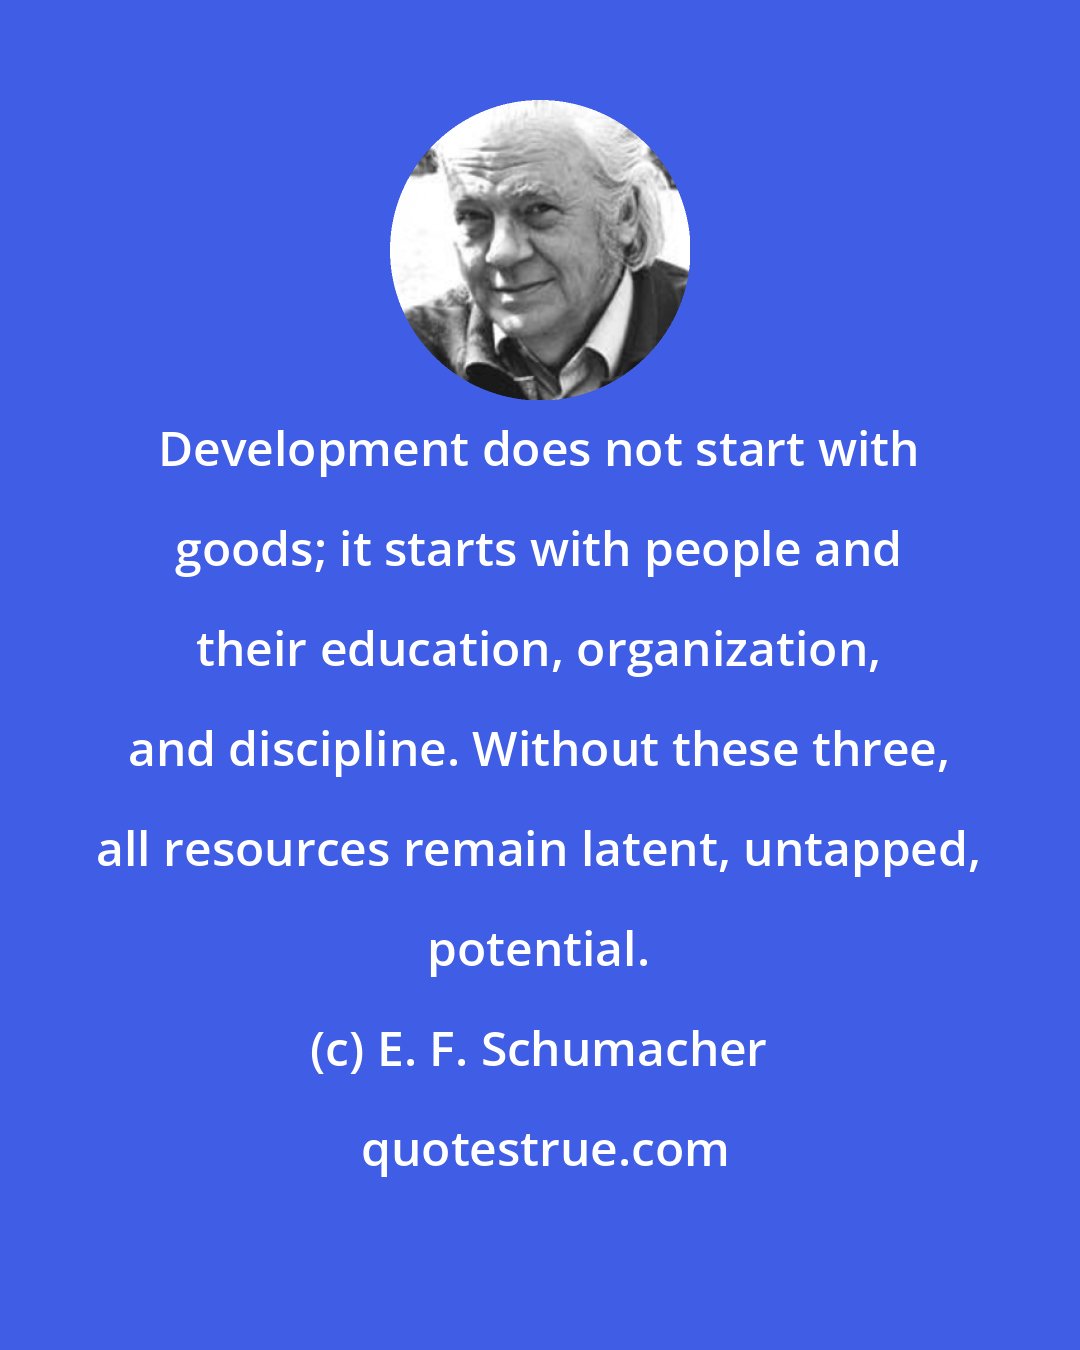 E. F. Schumacher: Development does not start with goods; it starts with people and their education, organization, and discipline. Without these three, all resources remain latent, untapped, potential.